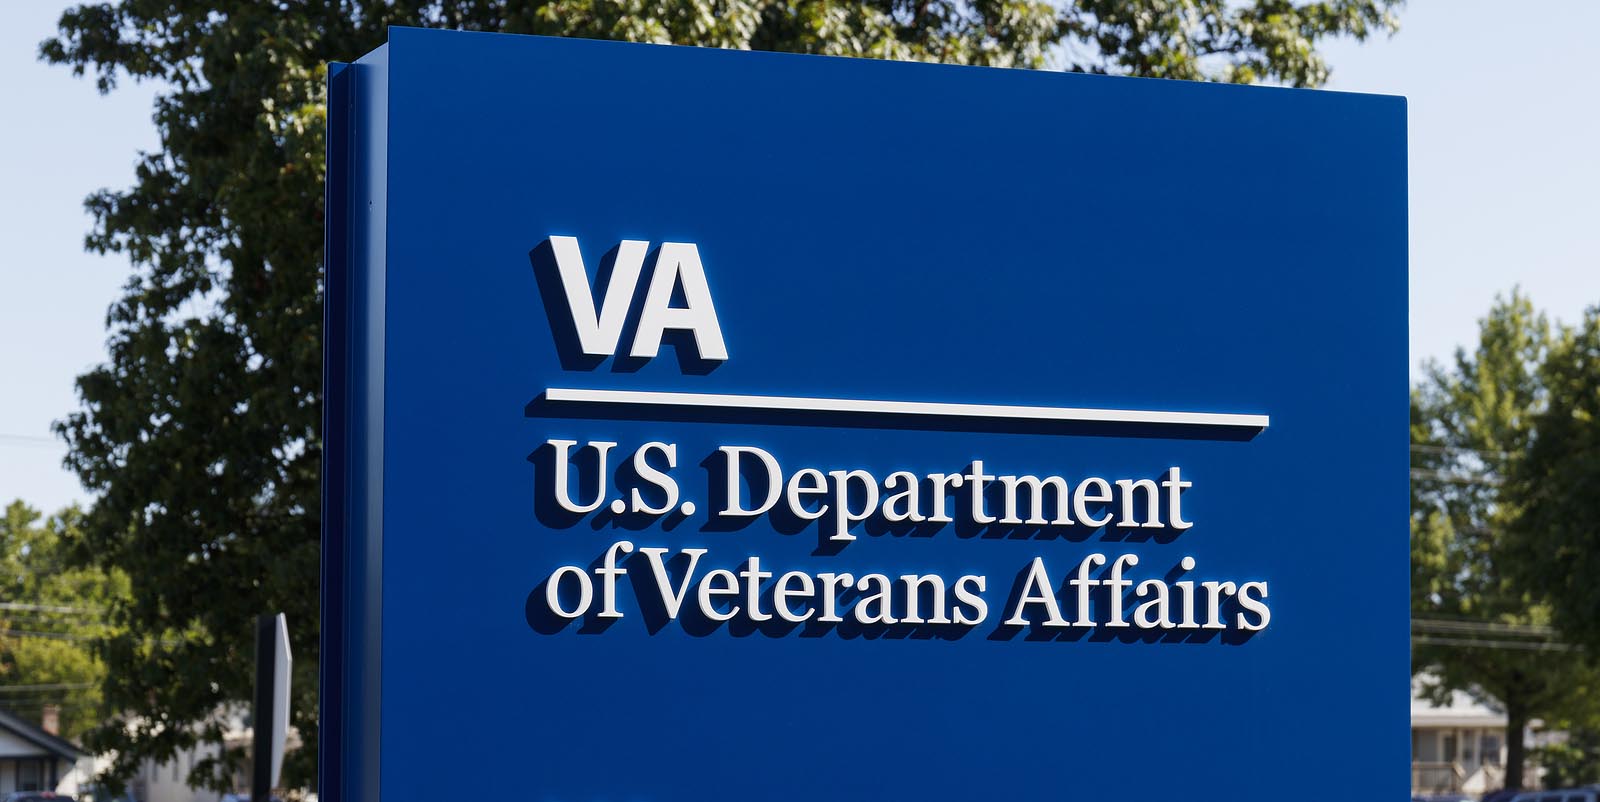 Sign for US Department of Veterans Affairs